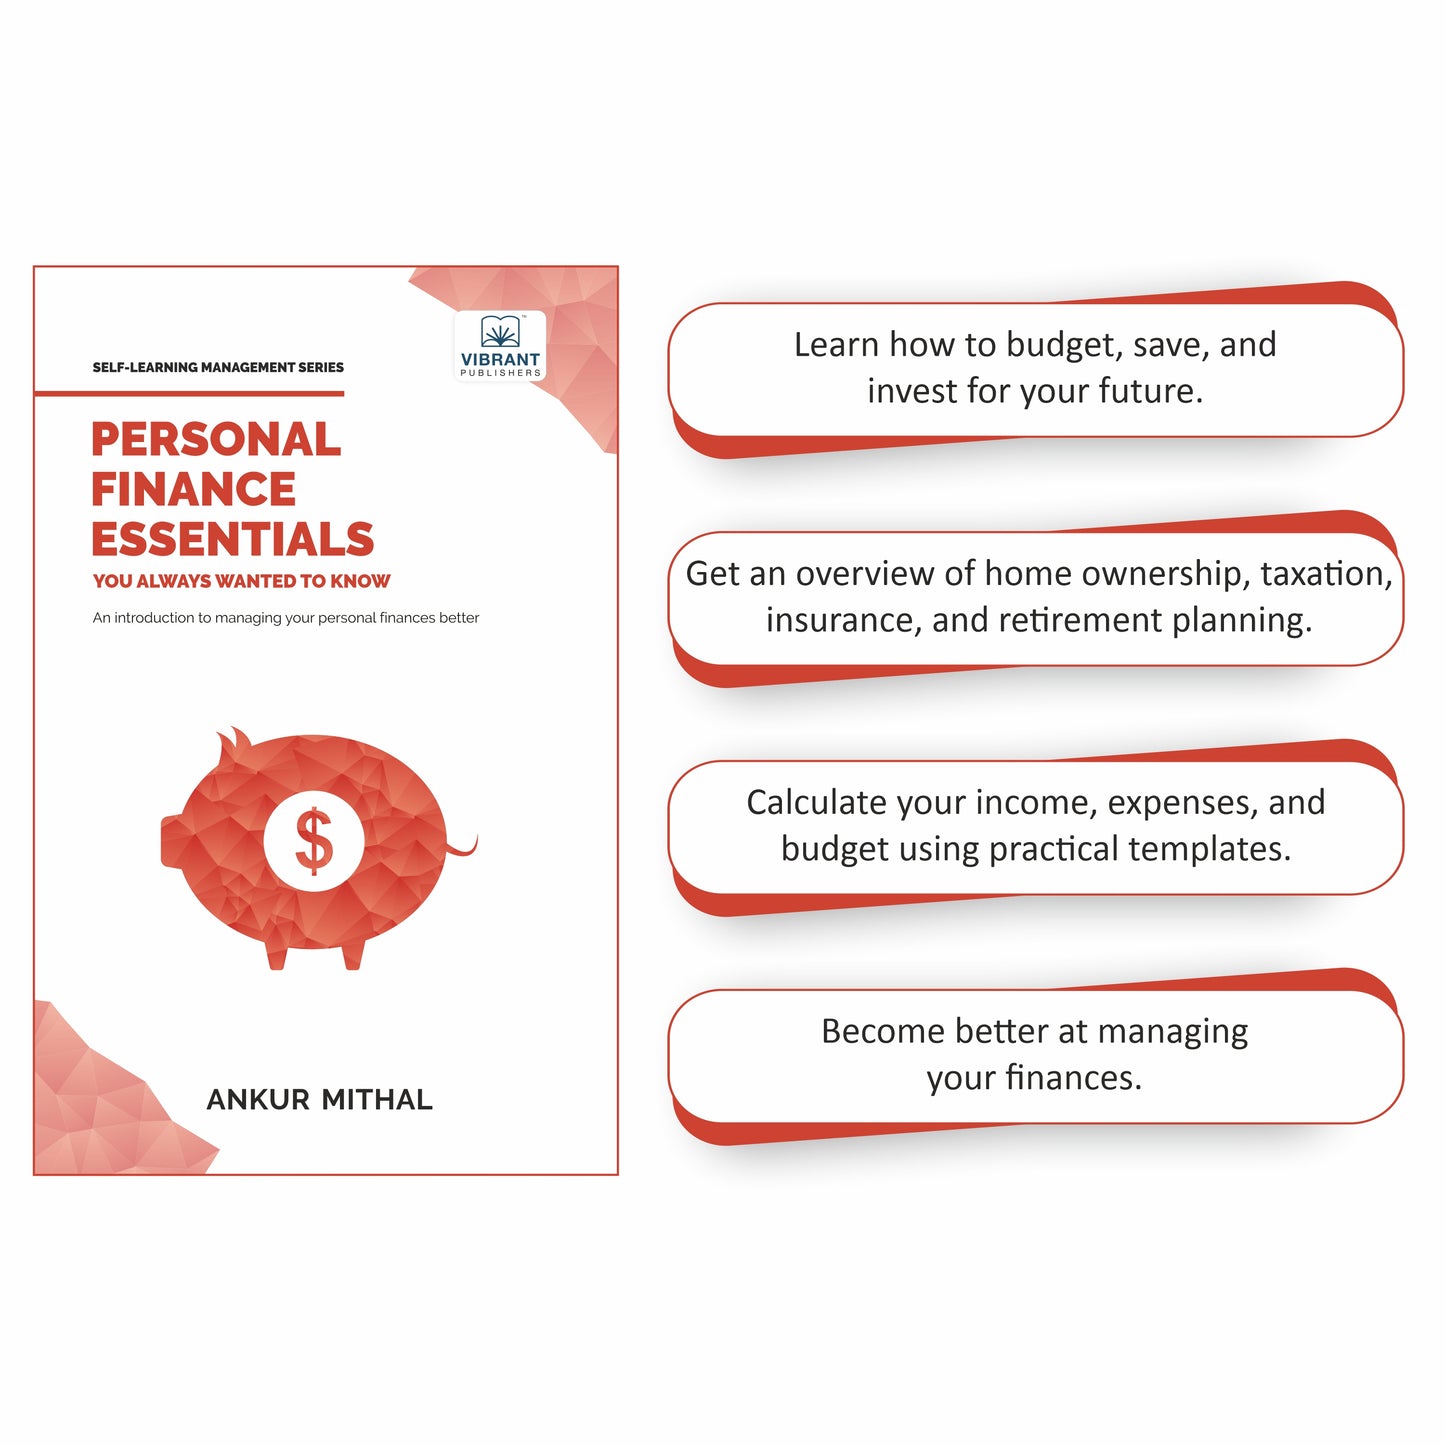 Personal Finance, Decision Making, and Leadership Essentials - An “Essential” Guide To Mastering 3 Indispensable Life Skills